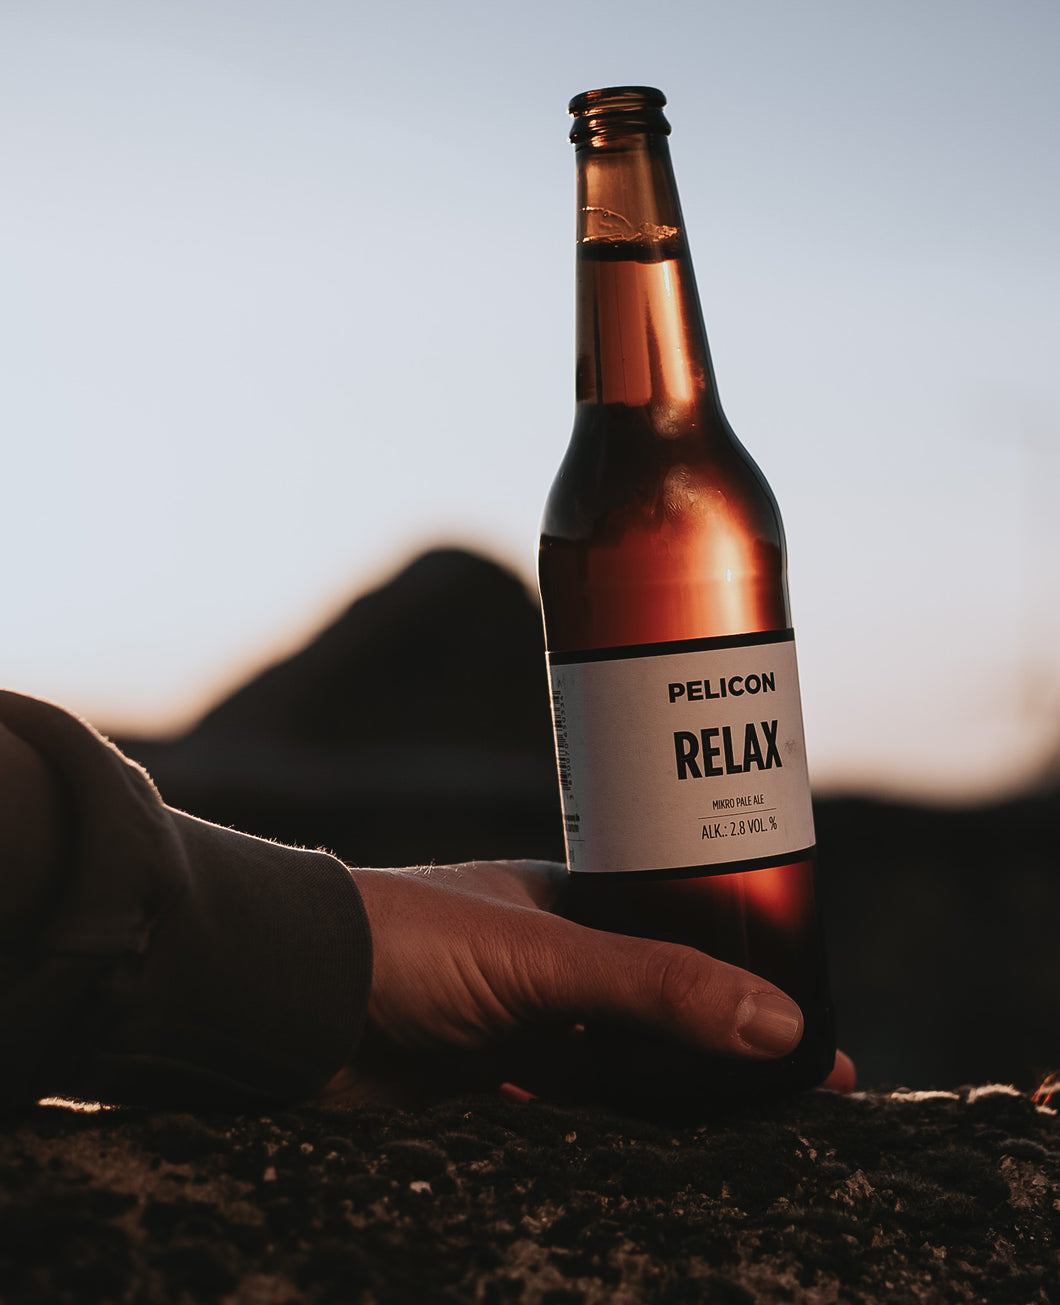 RELAX (mikro pale ale)